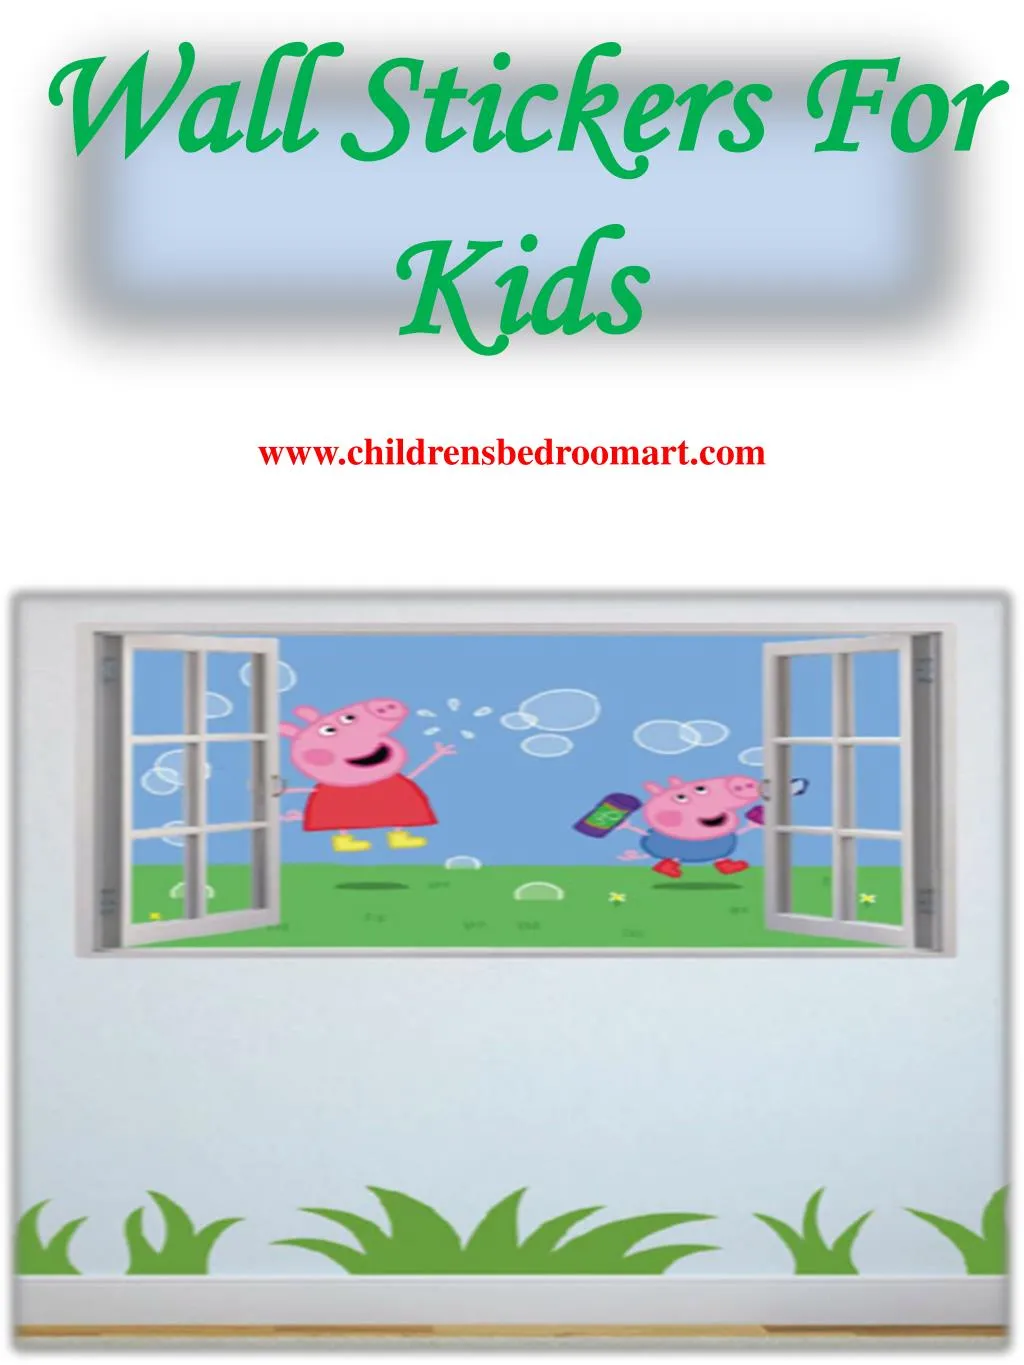 wall stickers for kids n.